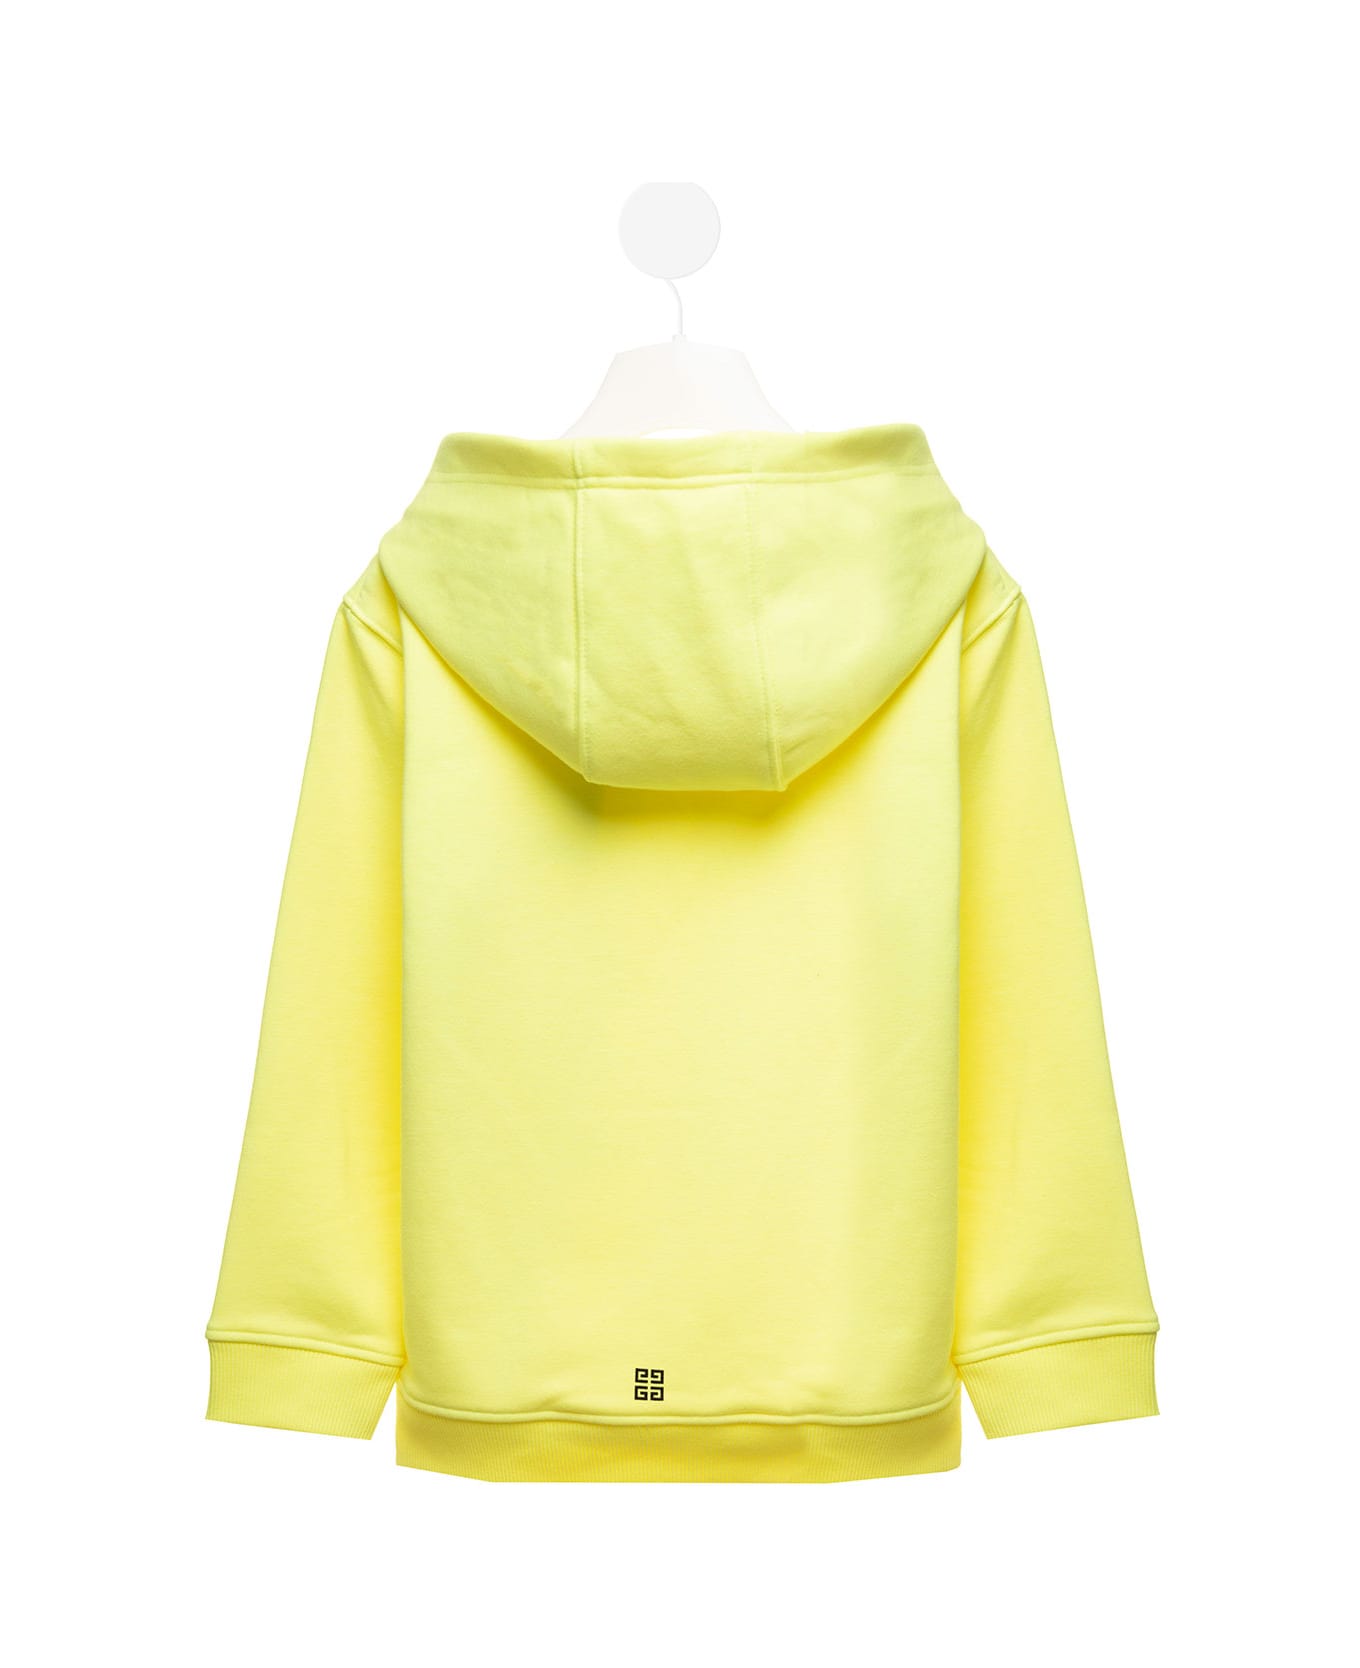 Givenchy Yellow Jersey Hoodie With Givenchy Kids 4g Logo Print - Yellow